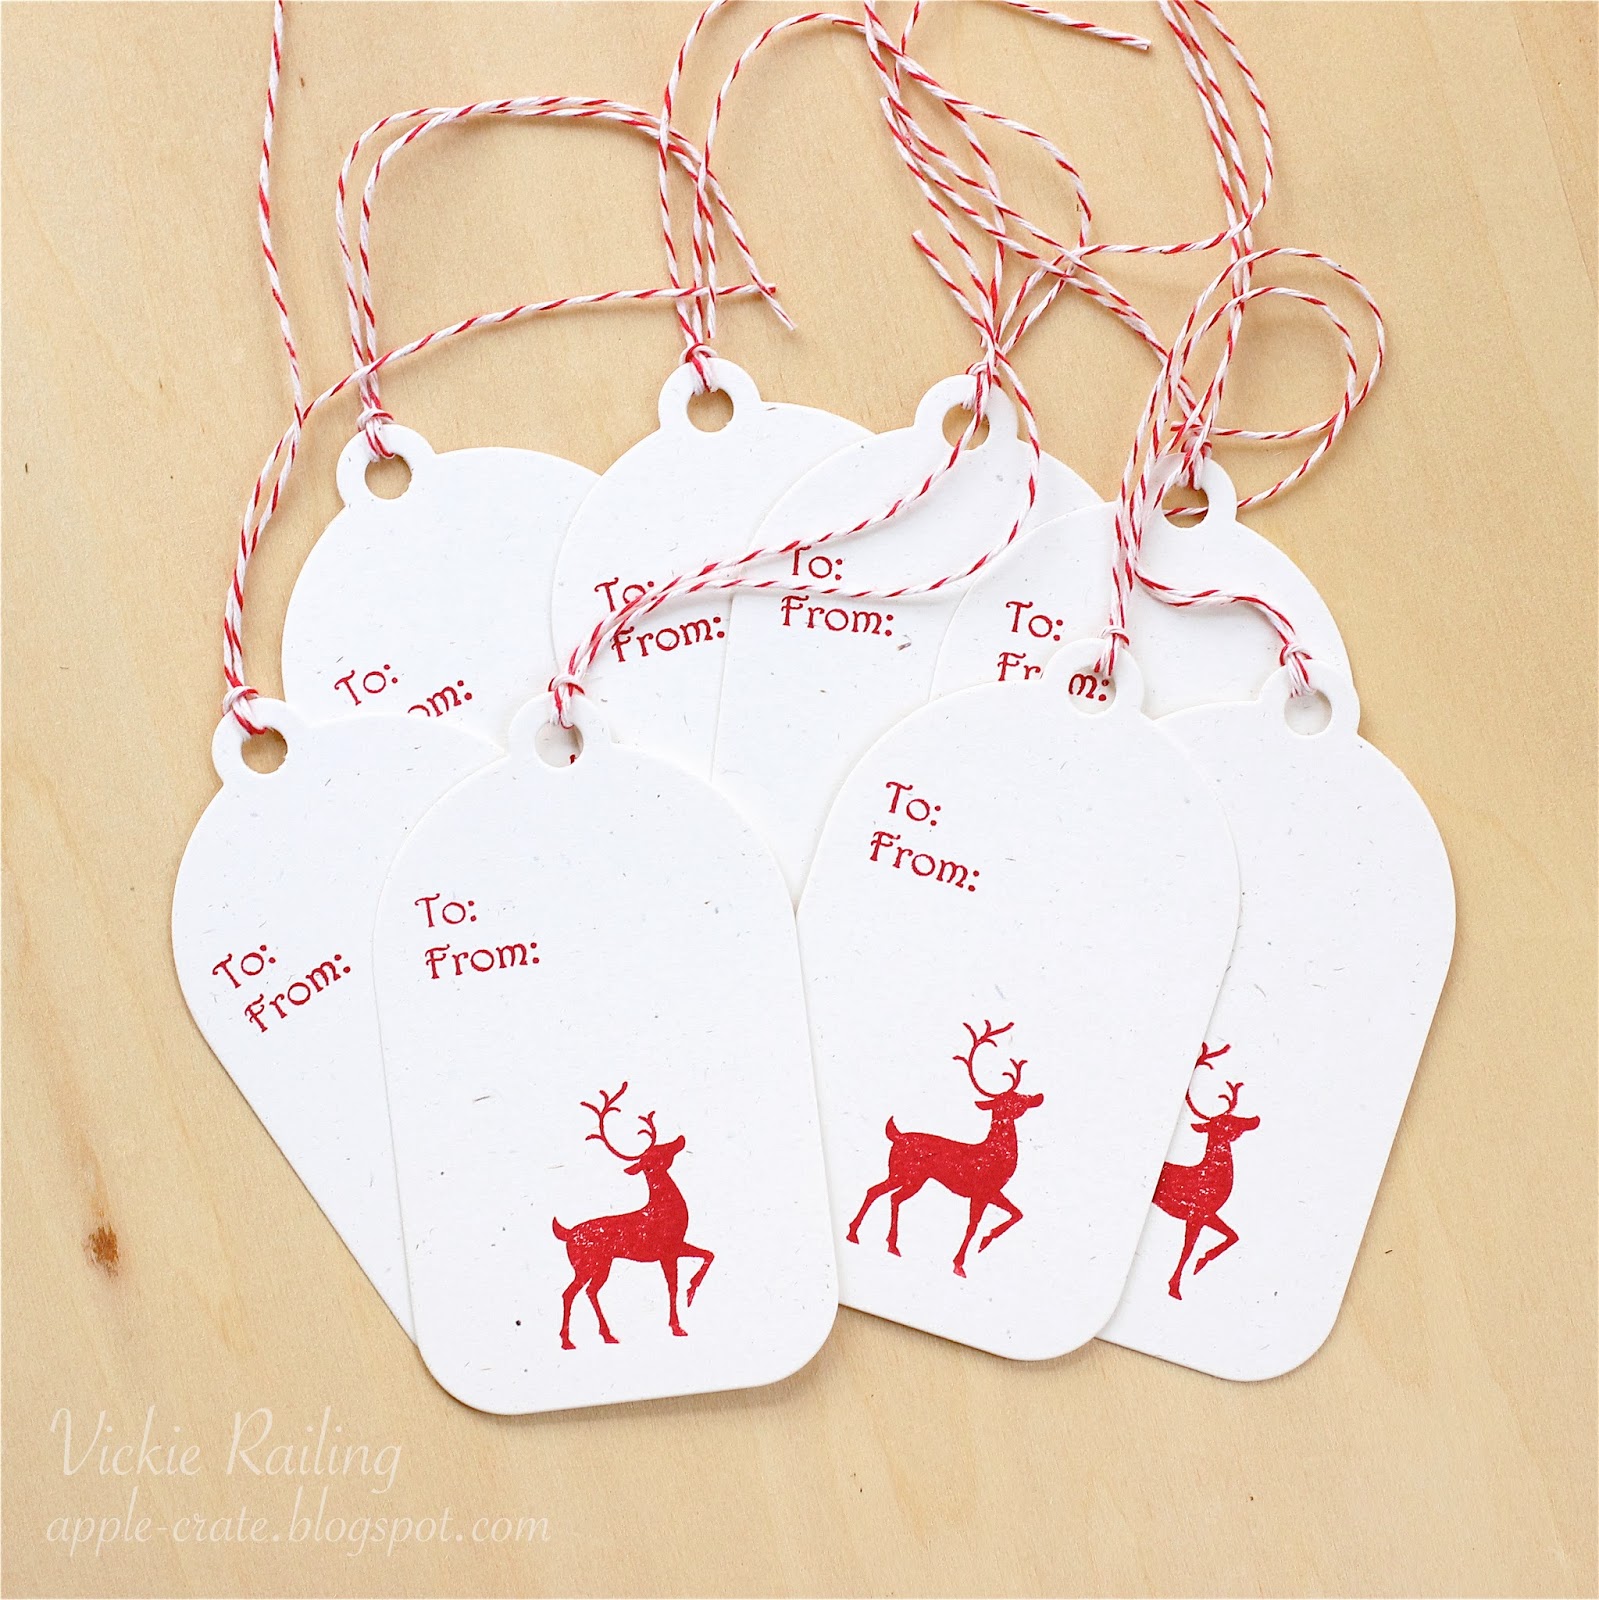 The Apple Crate: Reindeer Christmas Gift Tags